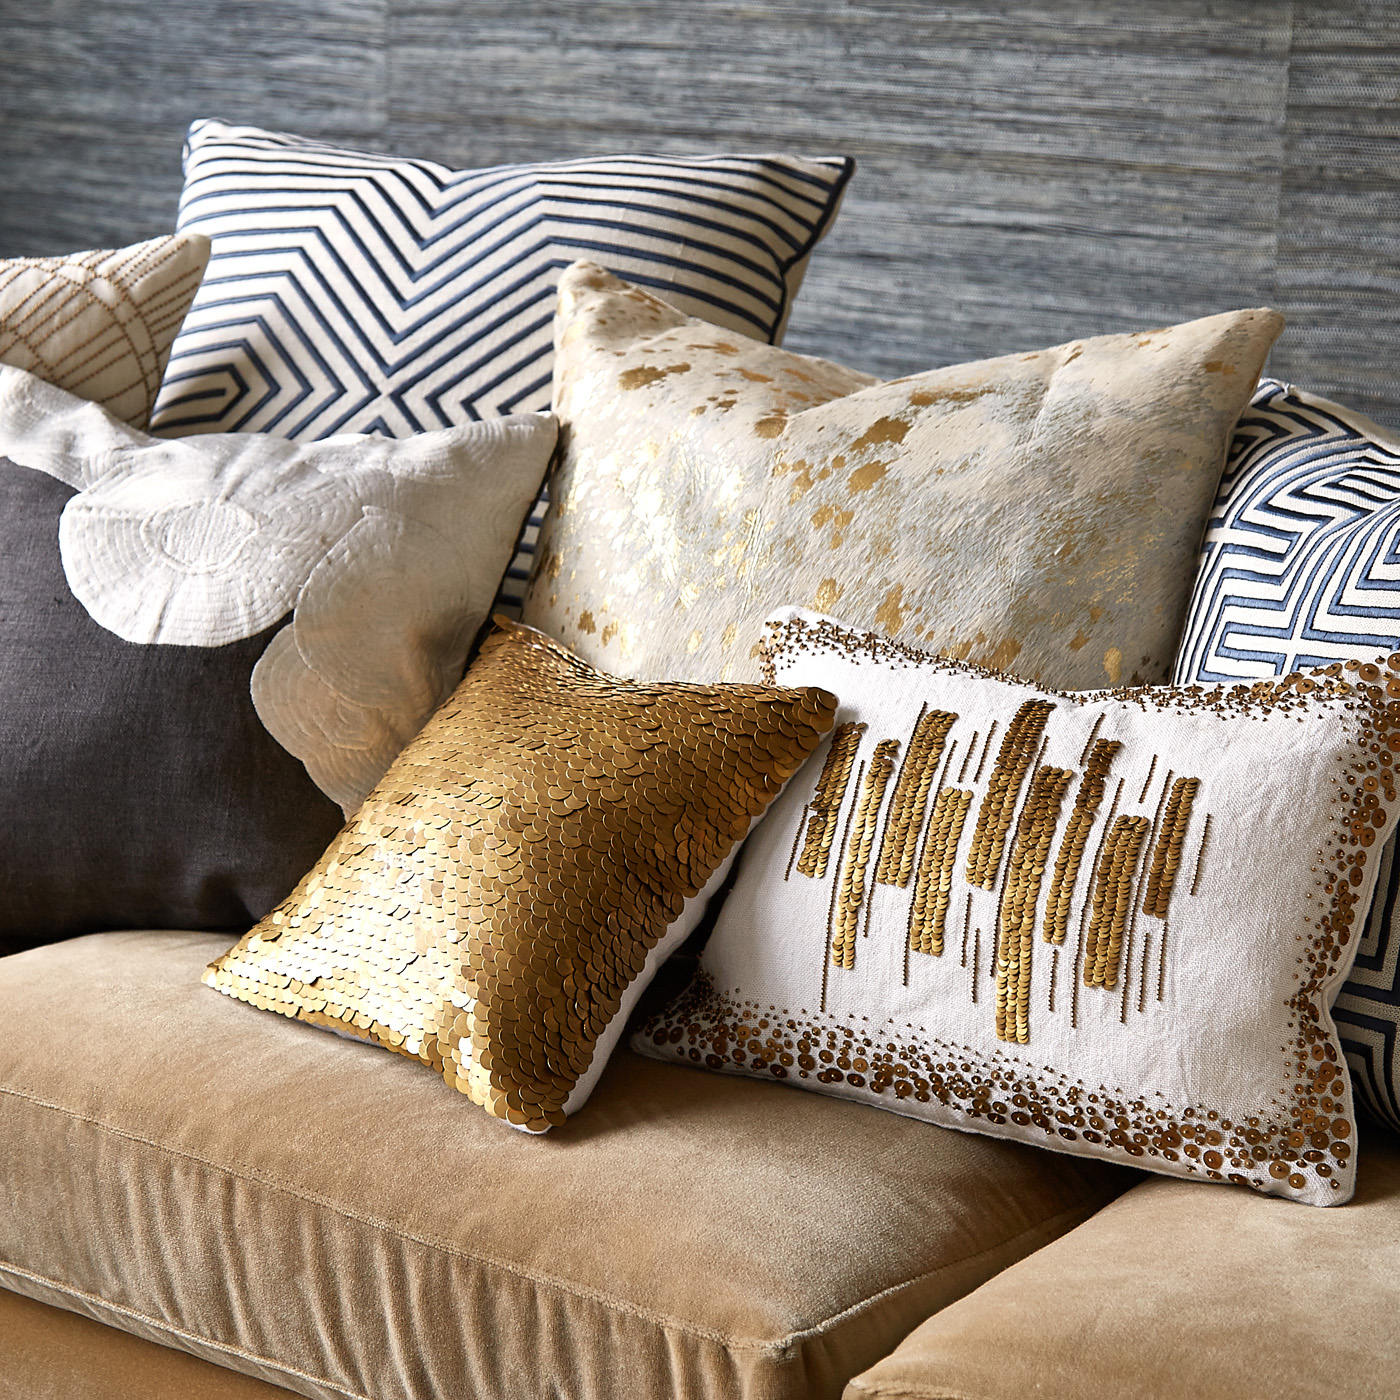 Throw Pillow Tips For Decorating Your Home And Adding Comfort